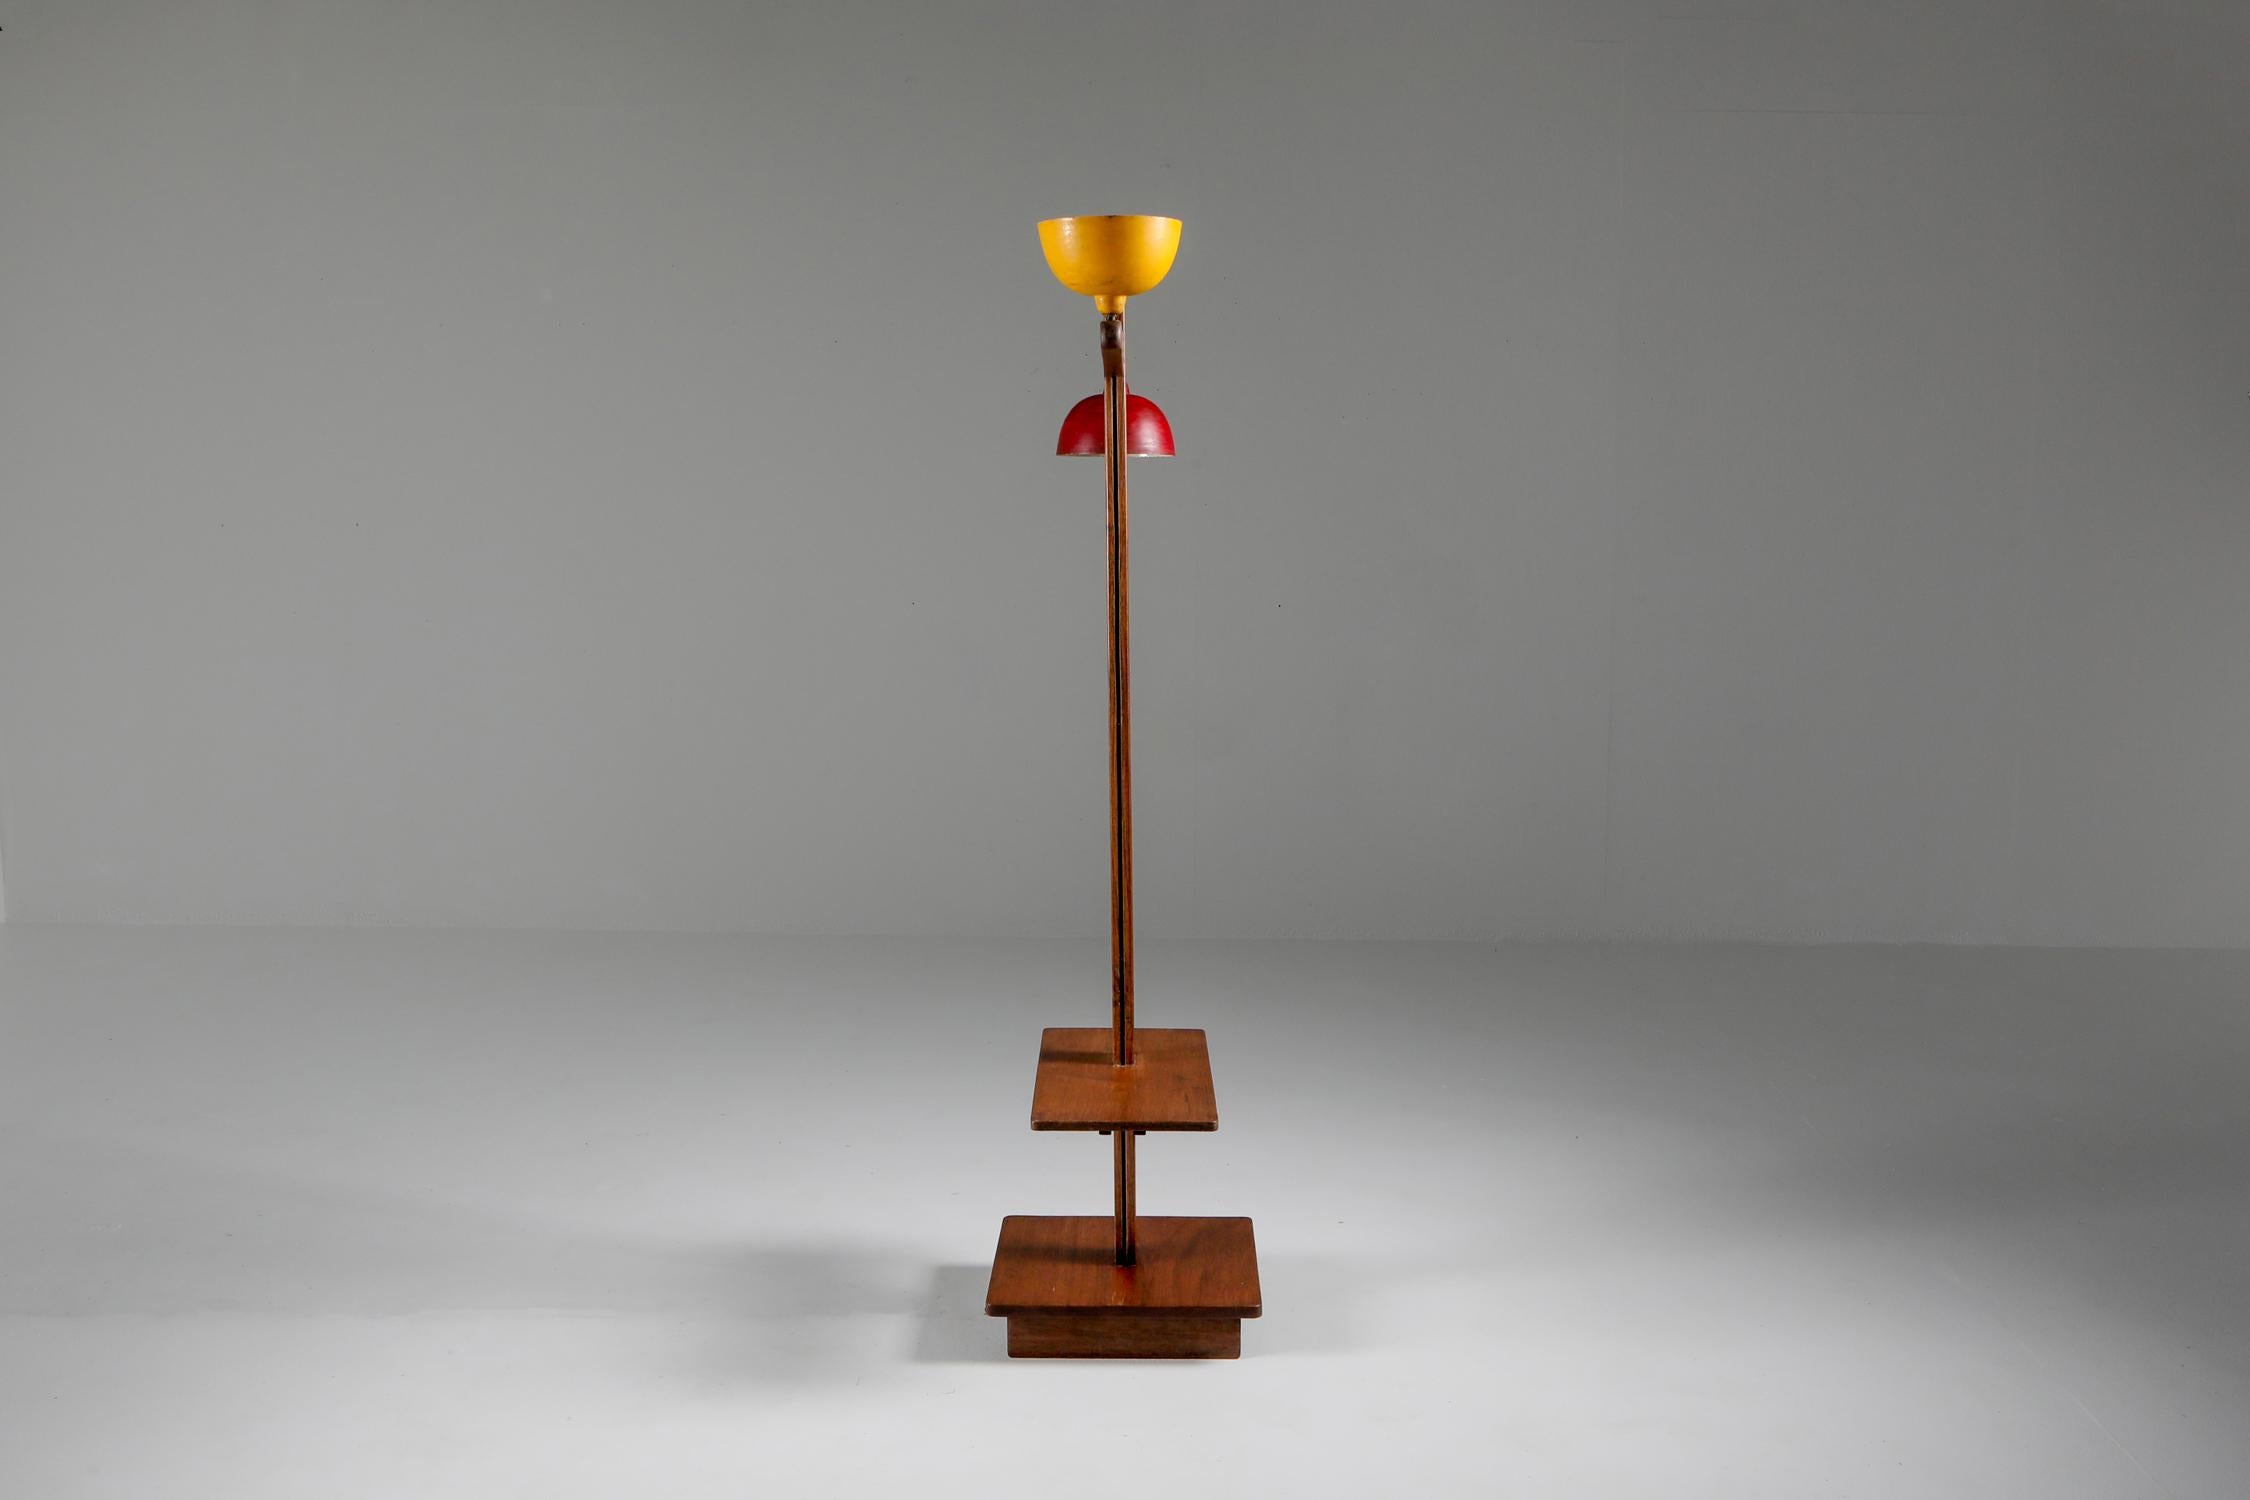 Mid-Century Modern Pierre Jeanneret 'Standard Lamp' PJ-100101 in Solid Teak with Yellow Shade